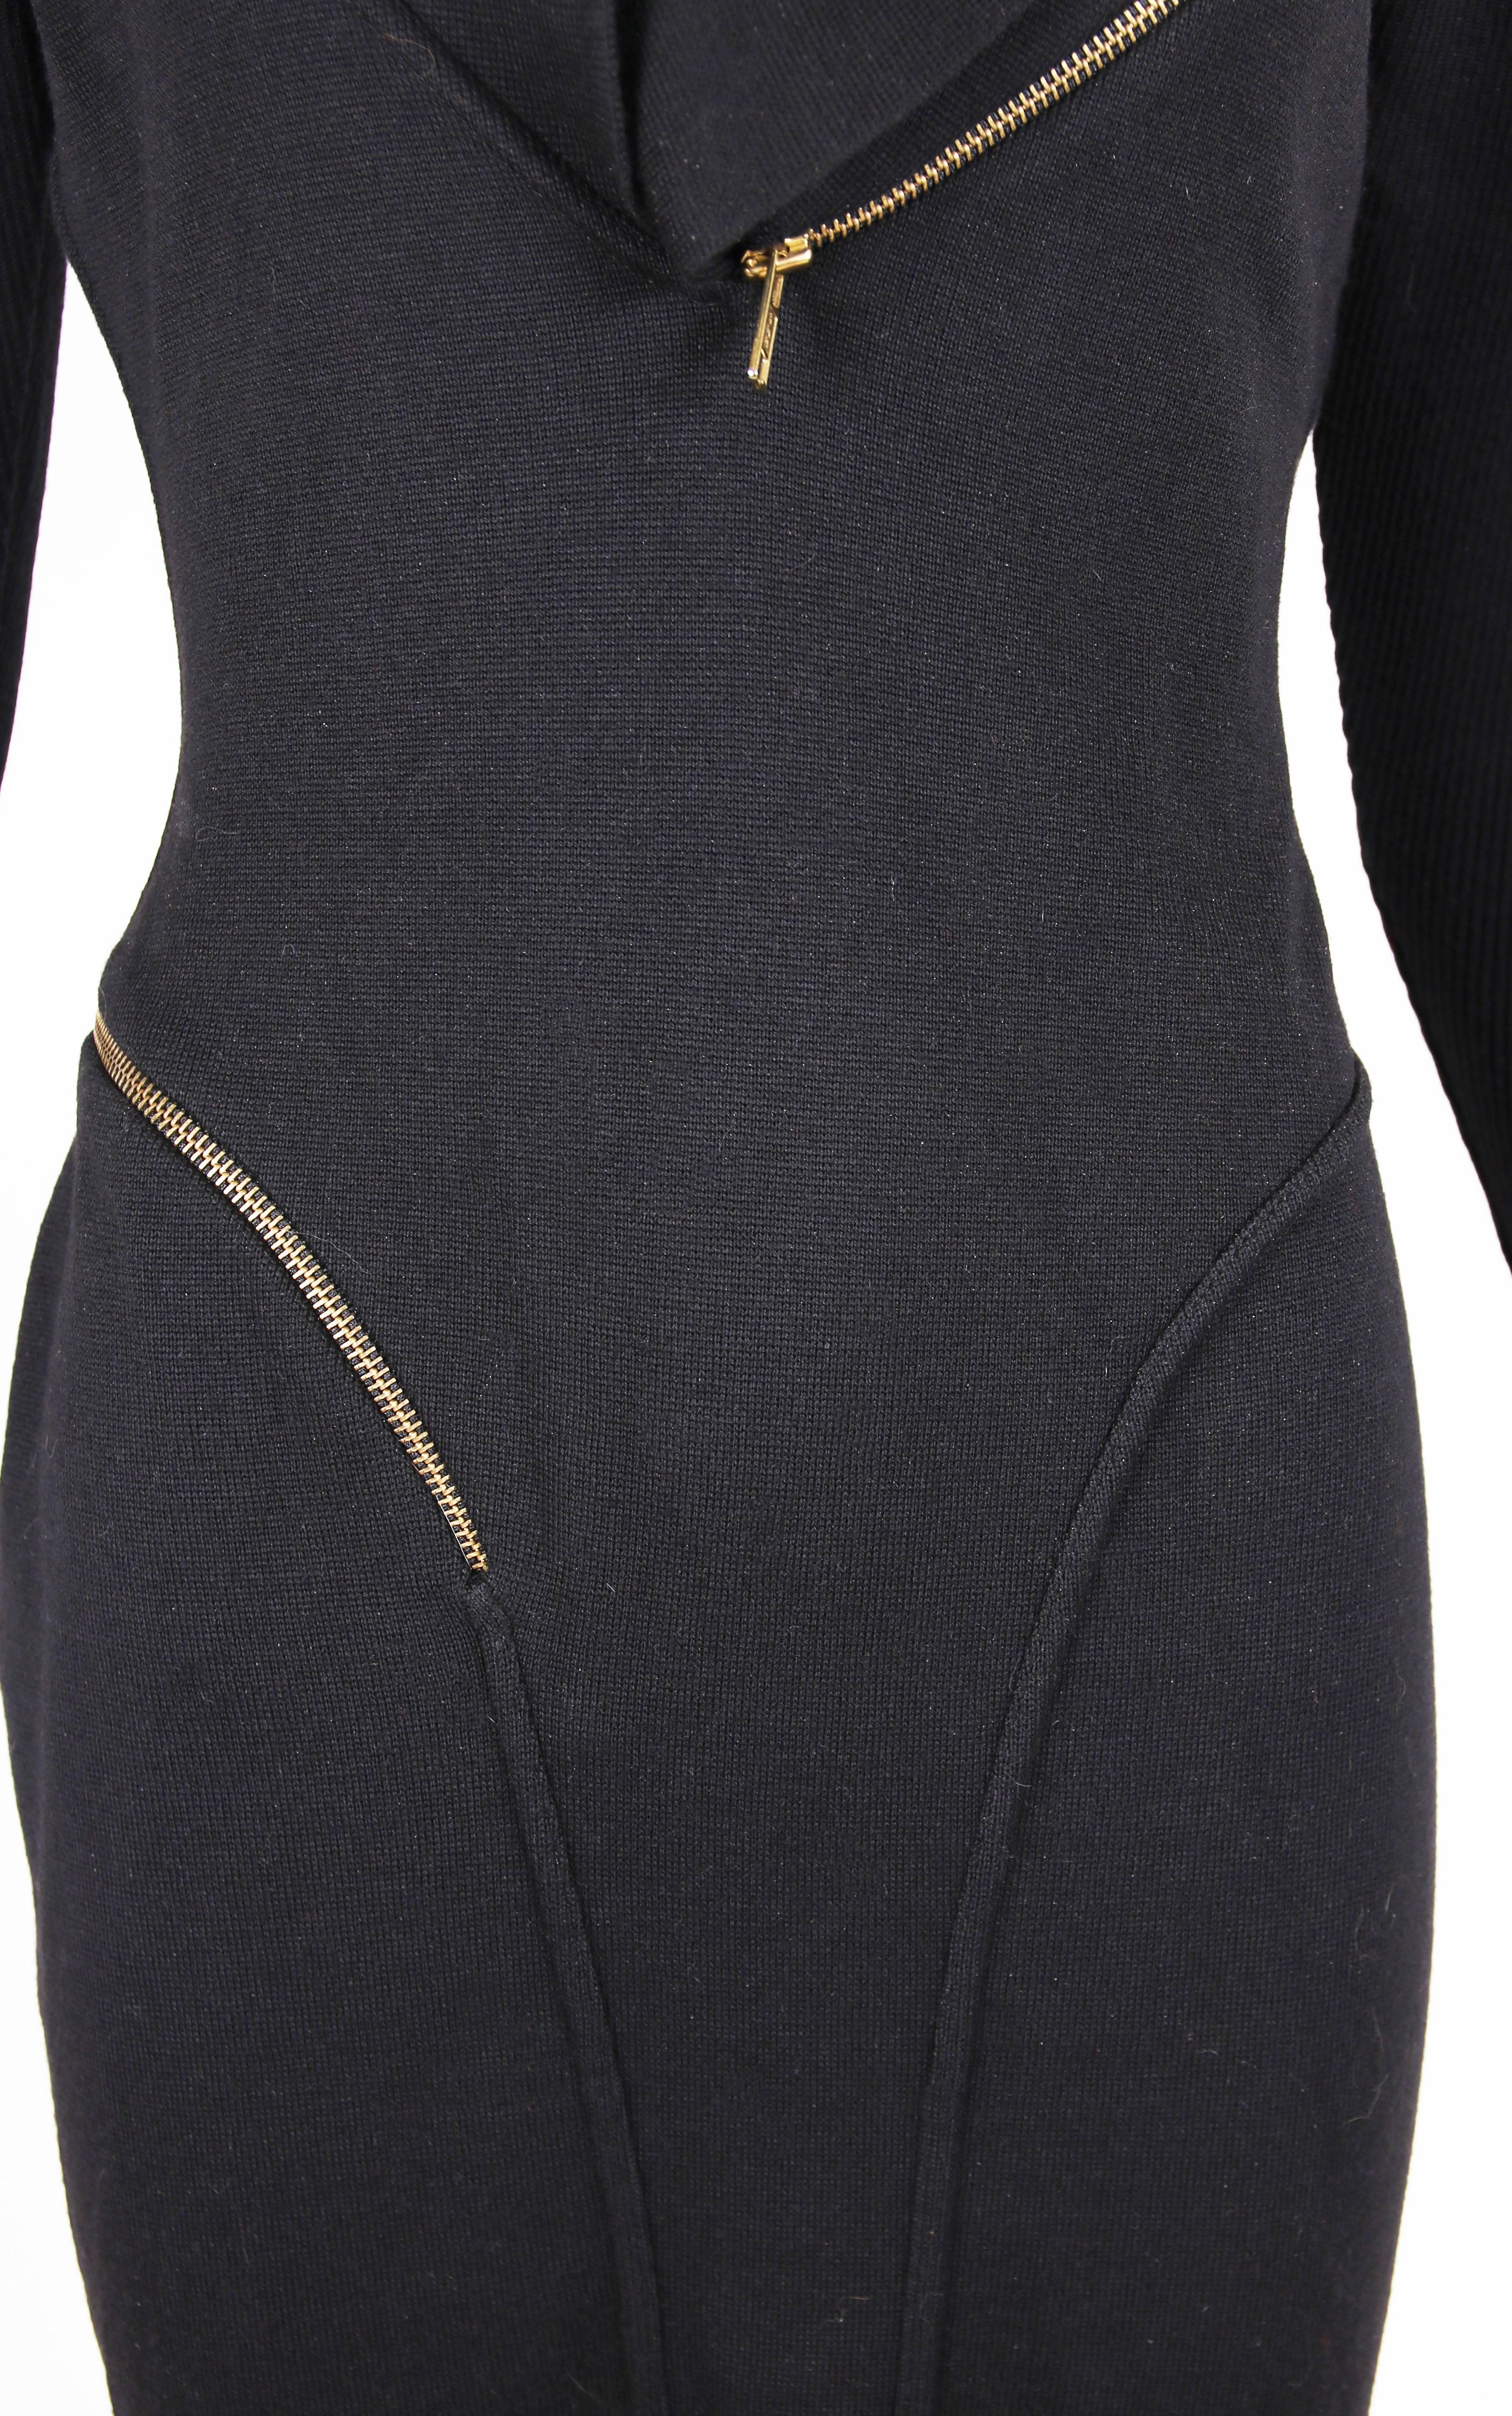 Women's Alaia Museum Quality Black Hooded And Zippered Bodycon Dress, 1986